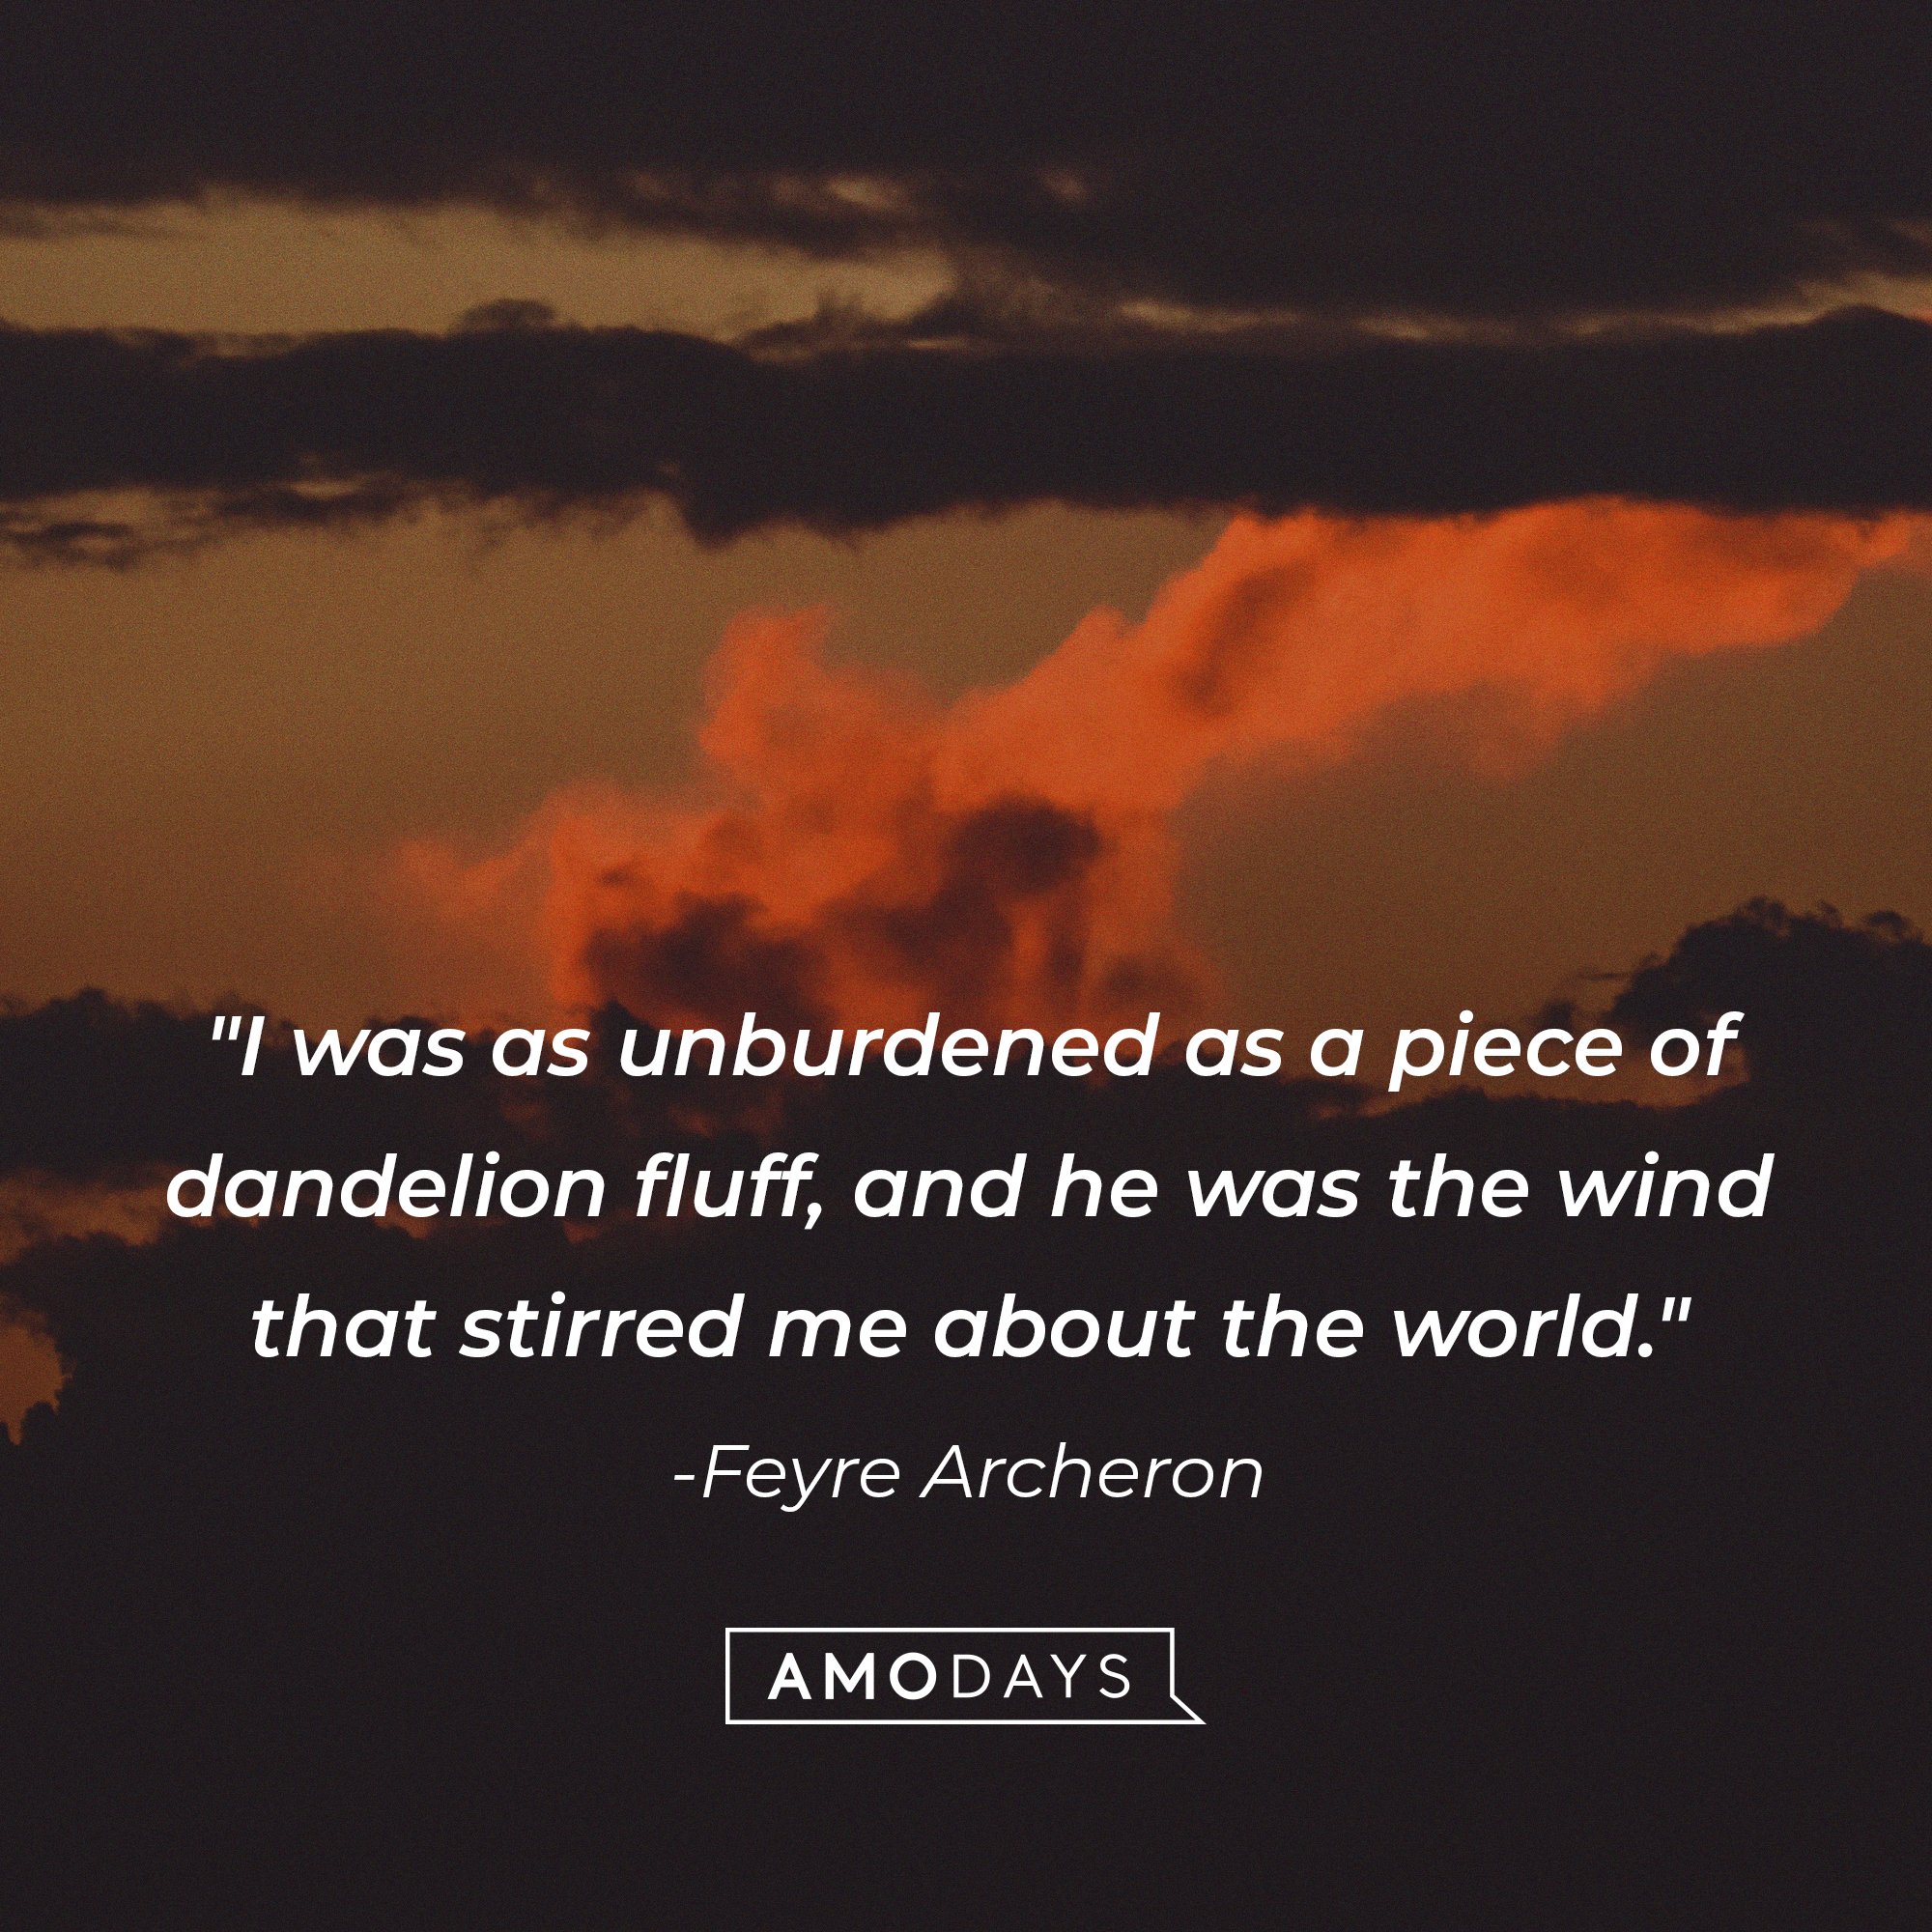  Feyre Archeron’s quote: "I was as unburdened as a piece of dandelion fluff, and he was the wind that stirred me about the world." | Image: AmoDays